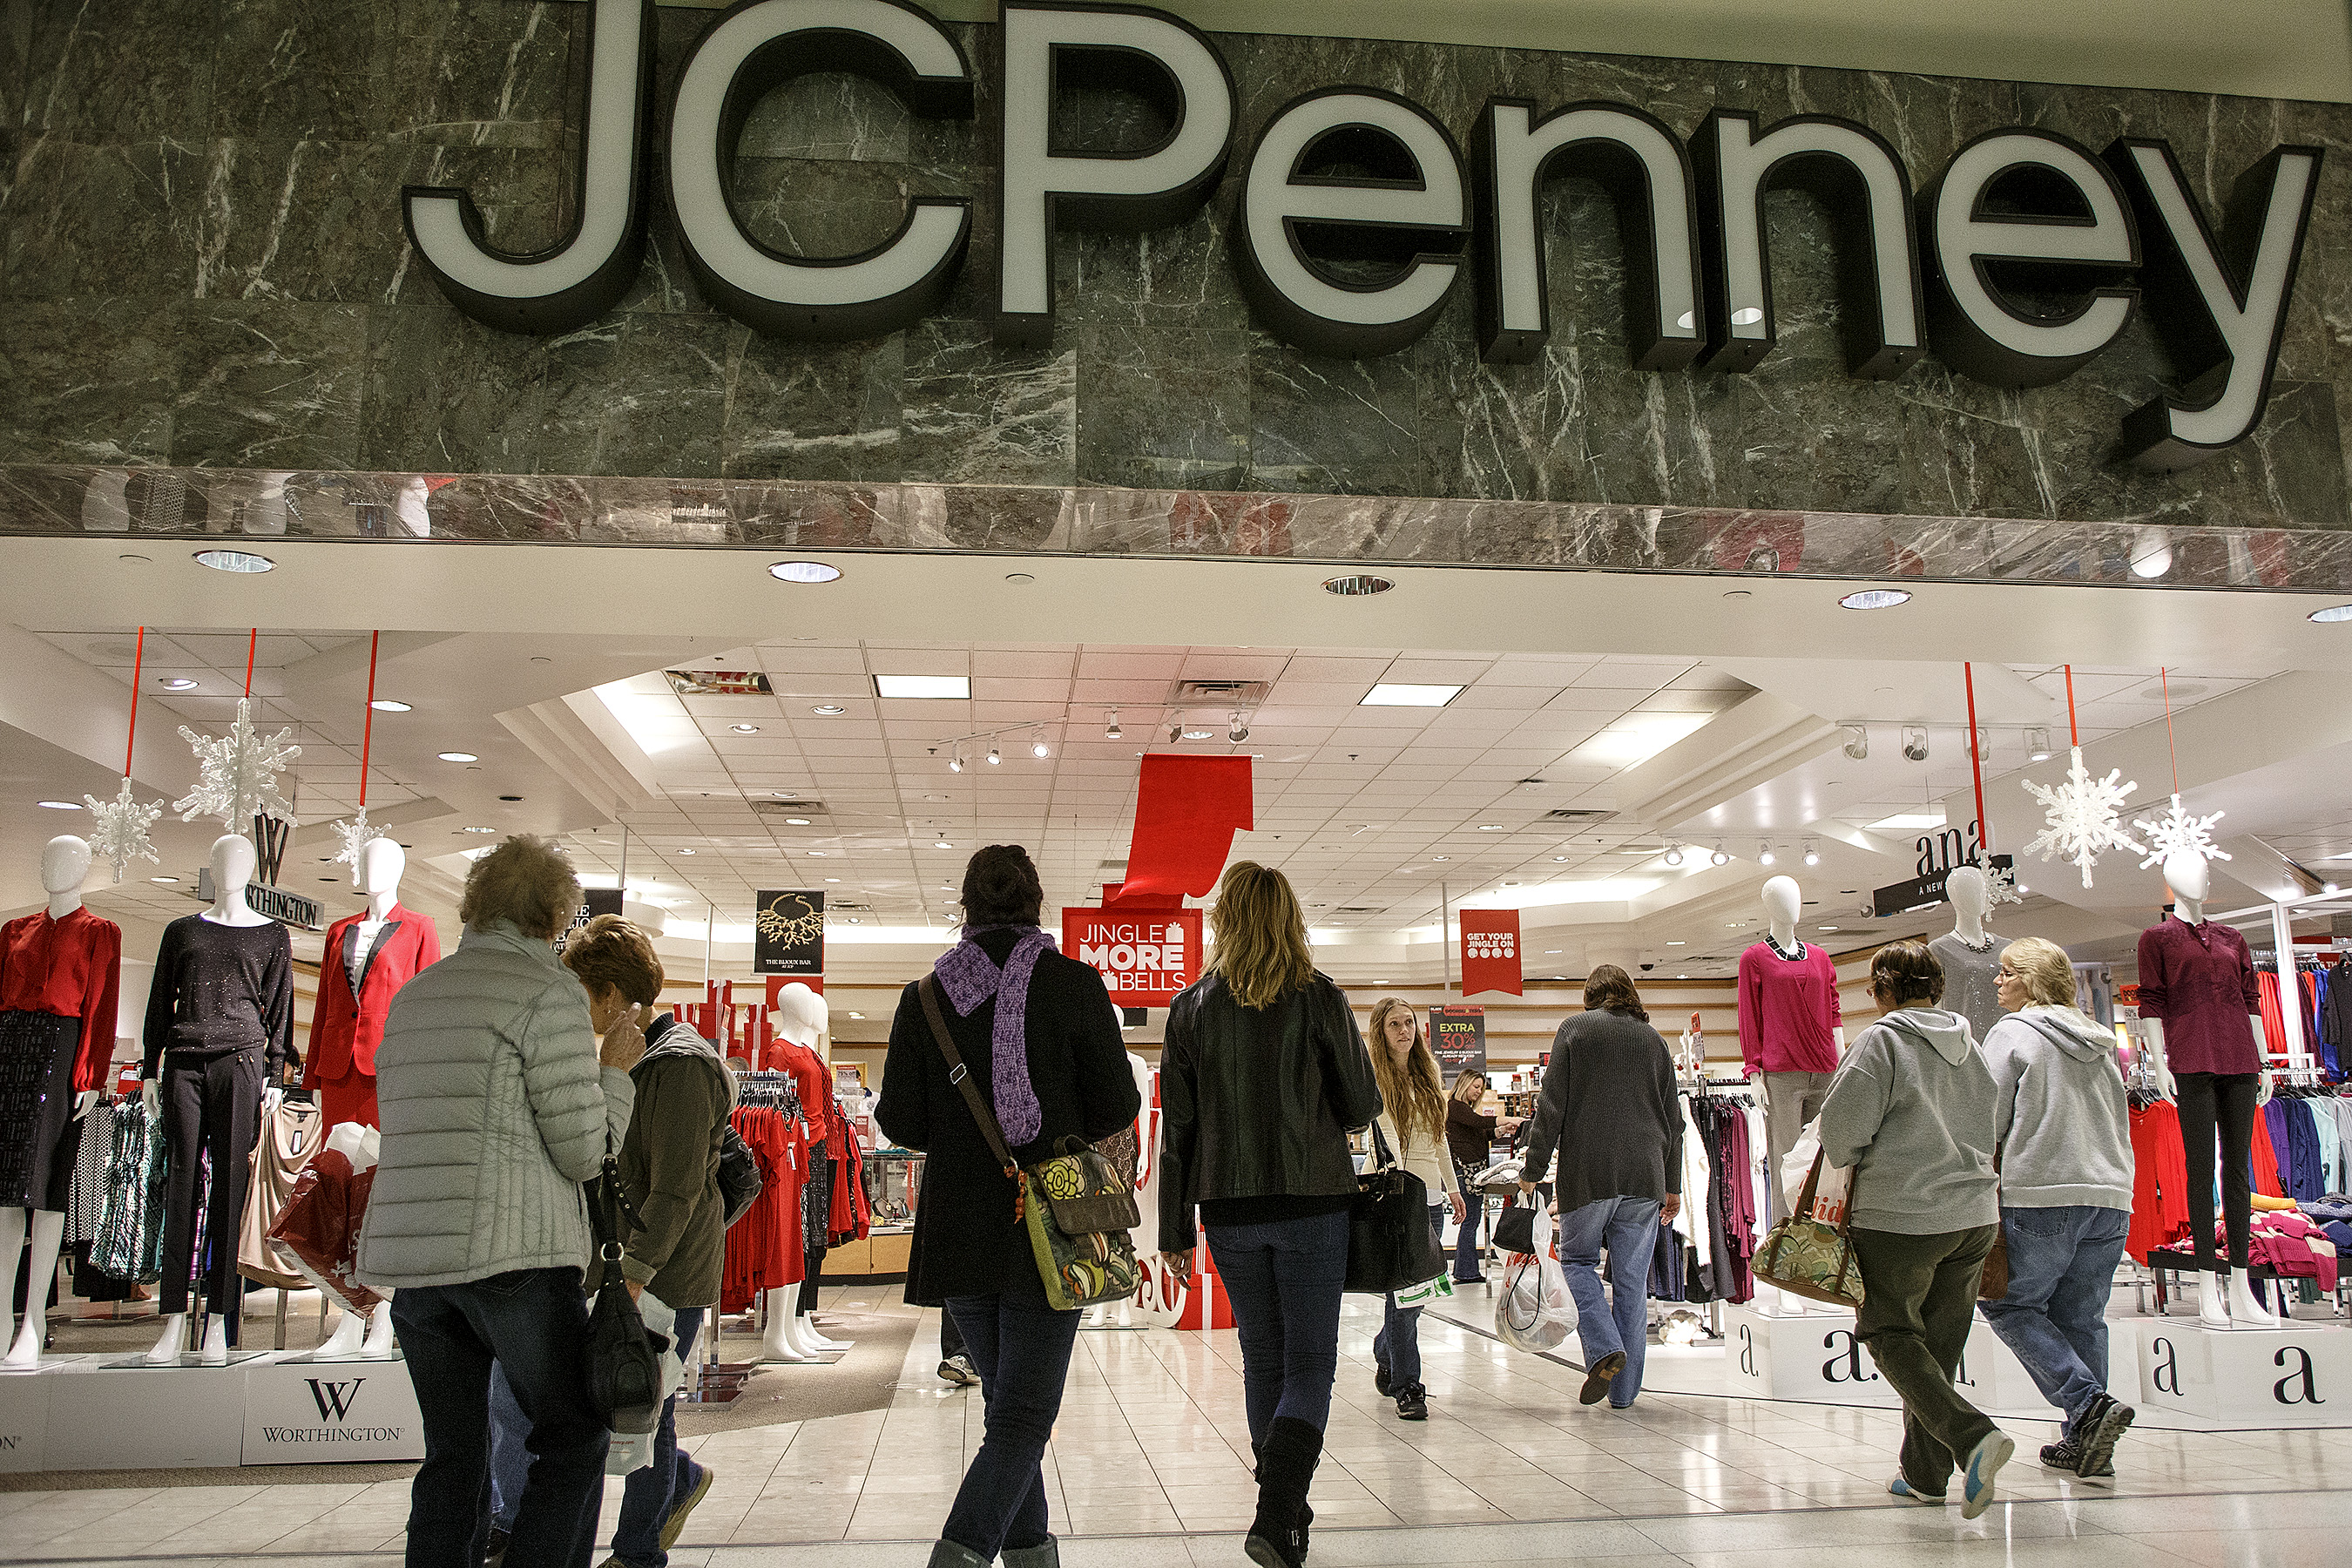 J.C. Penney will file for bankruptcy, close 200 stores, reports say 